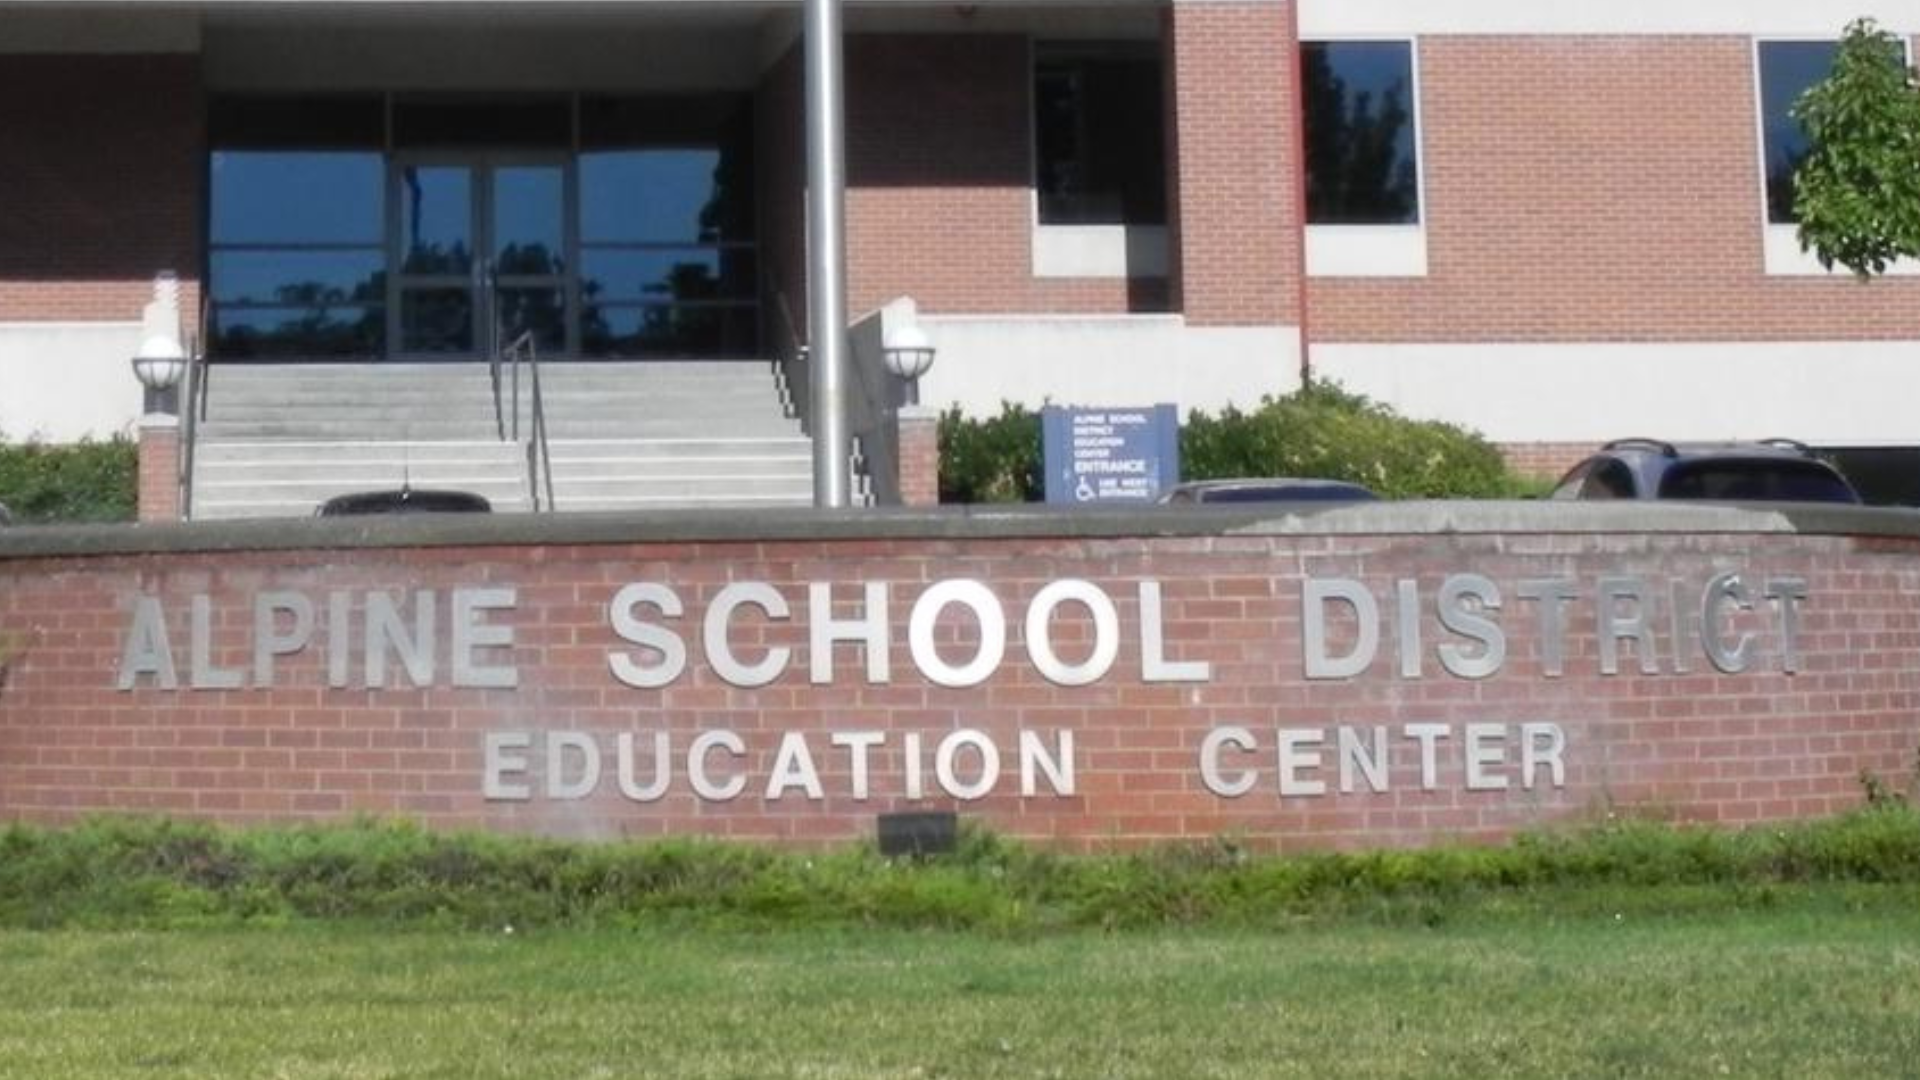 The Alpine School District's computer systems are being investigated after the district's technology has been investigated...